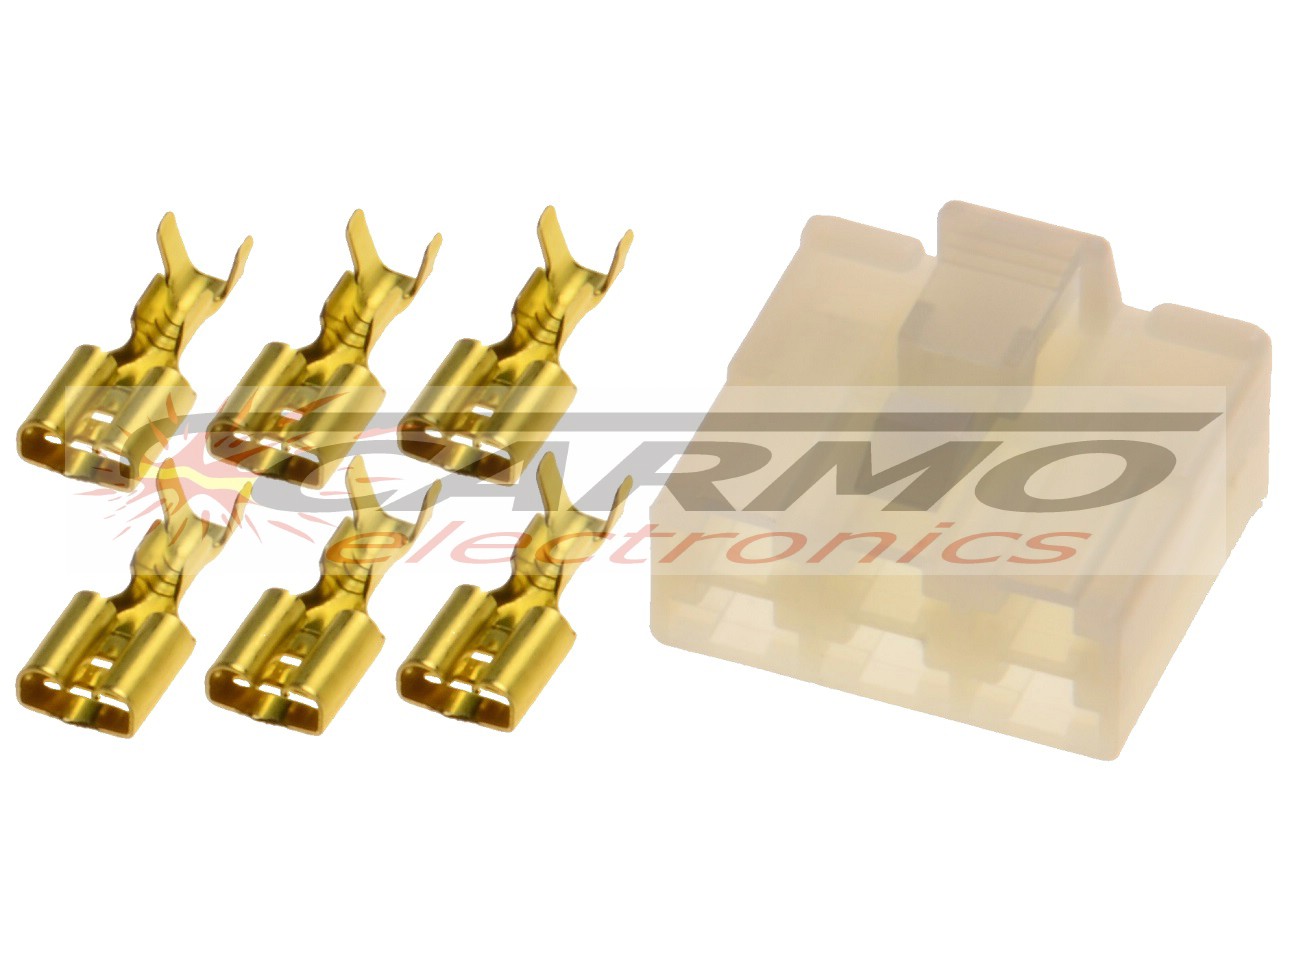 Connector for CARR201, CARR202, CARR261, CARR551 - Clicca l'immagine per chiudere